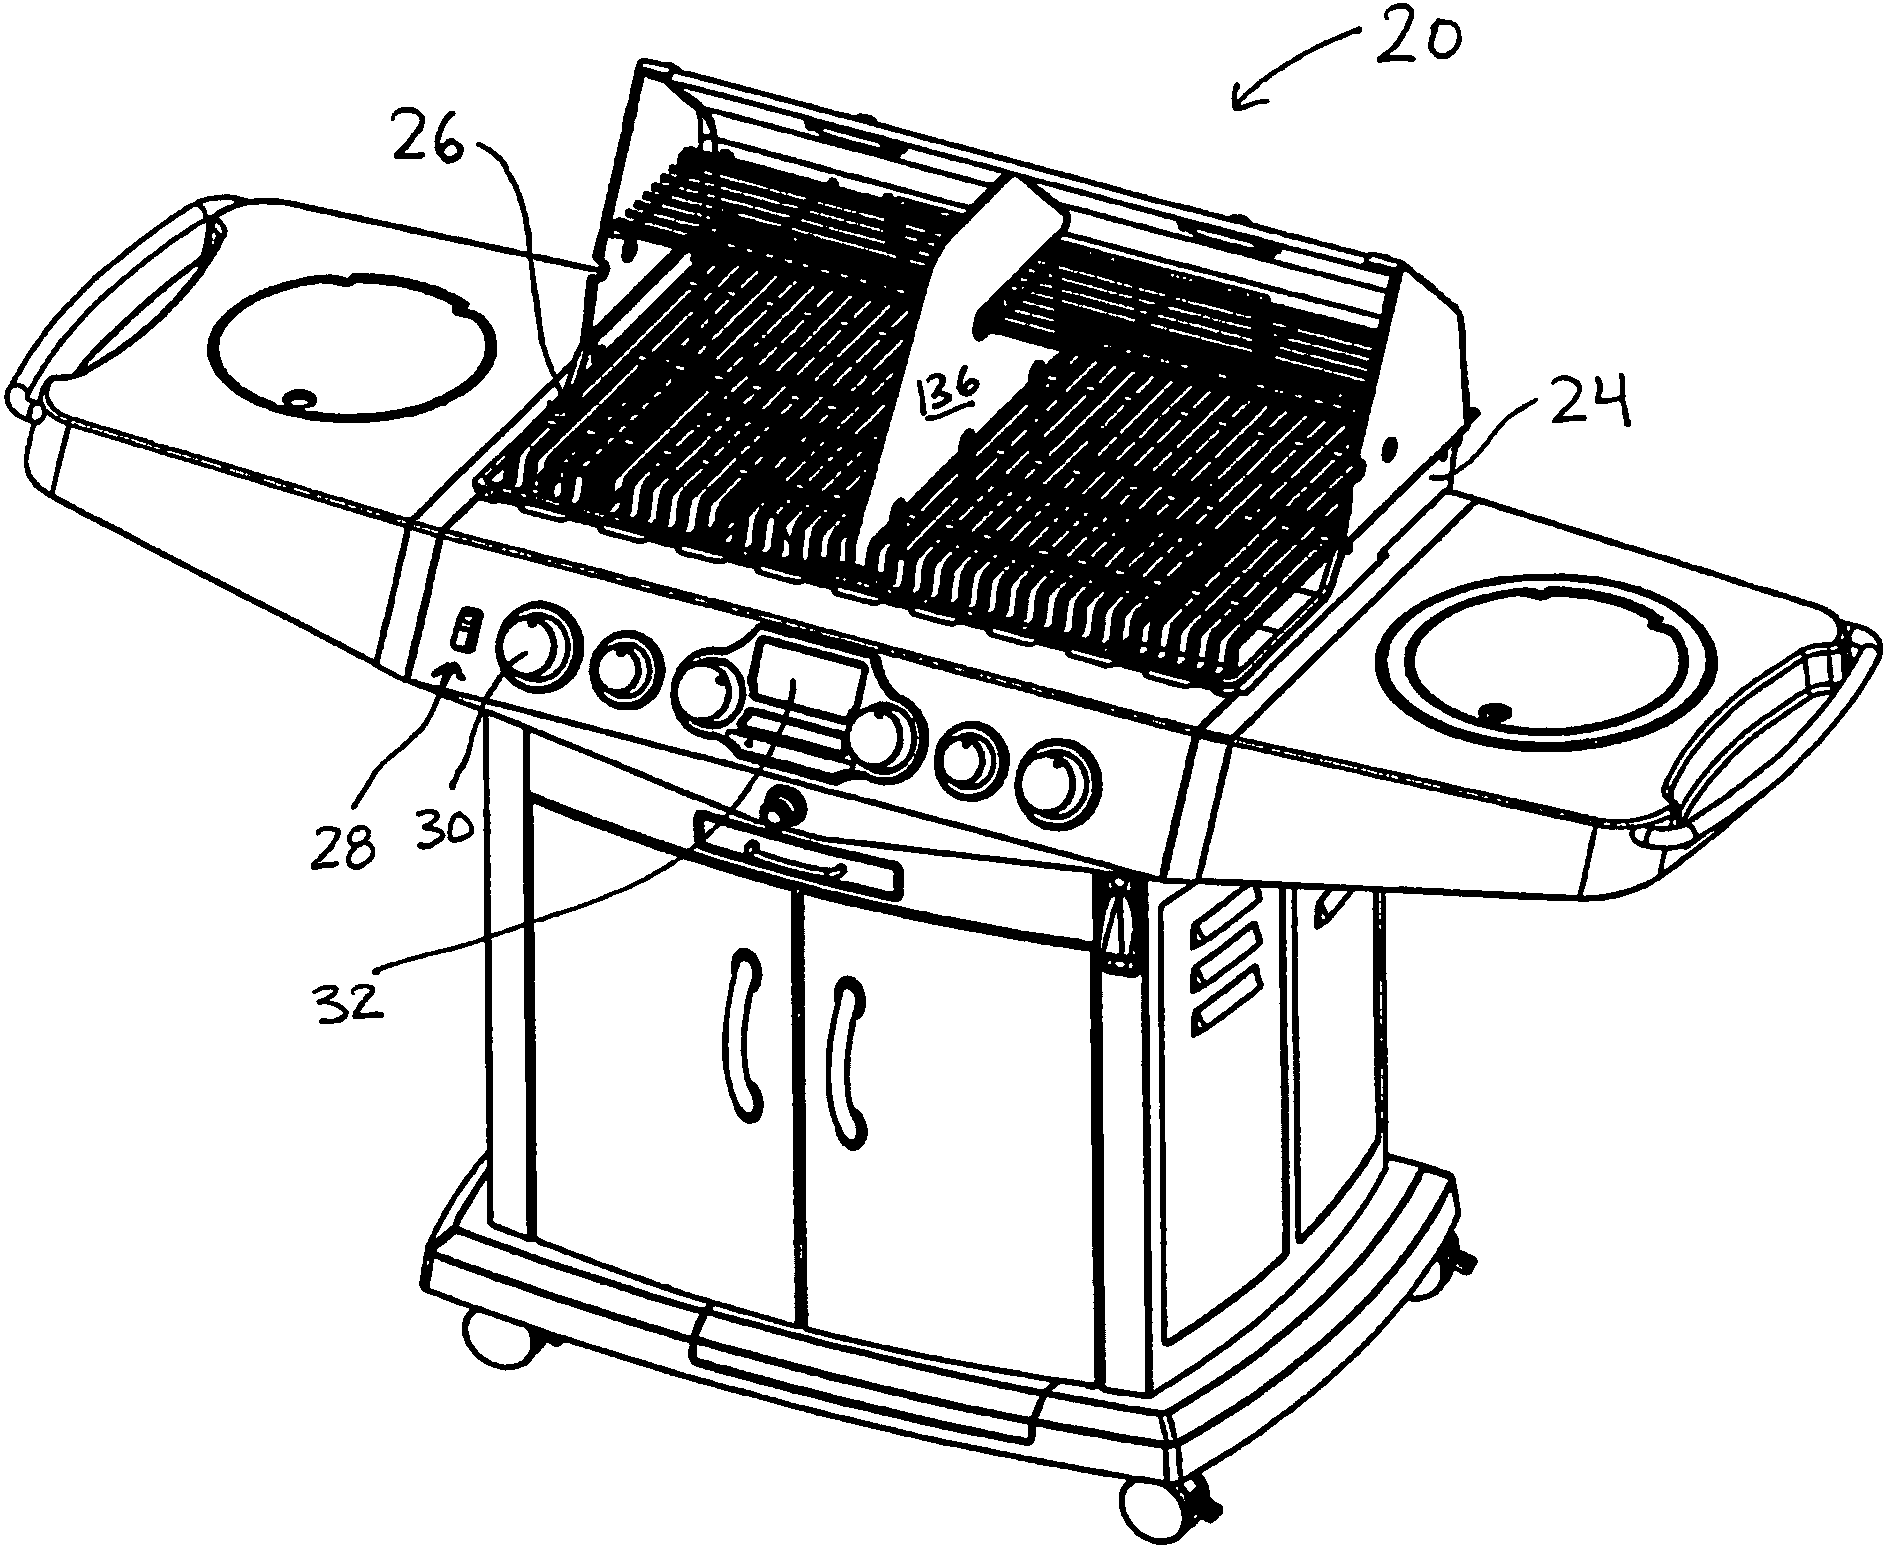 Temperature control apparatus and method for a barbeque grill